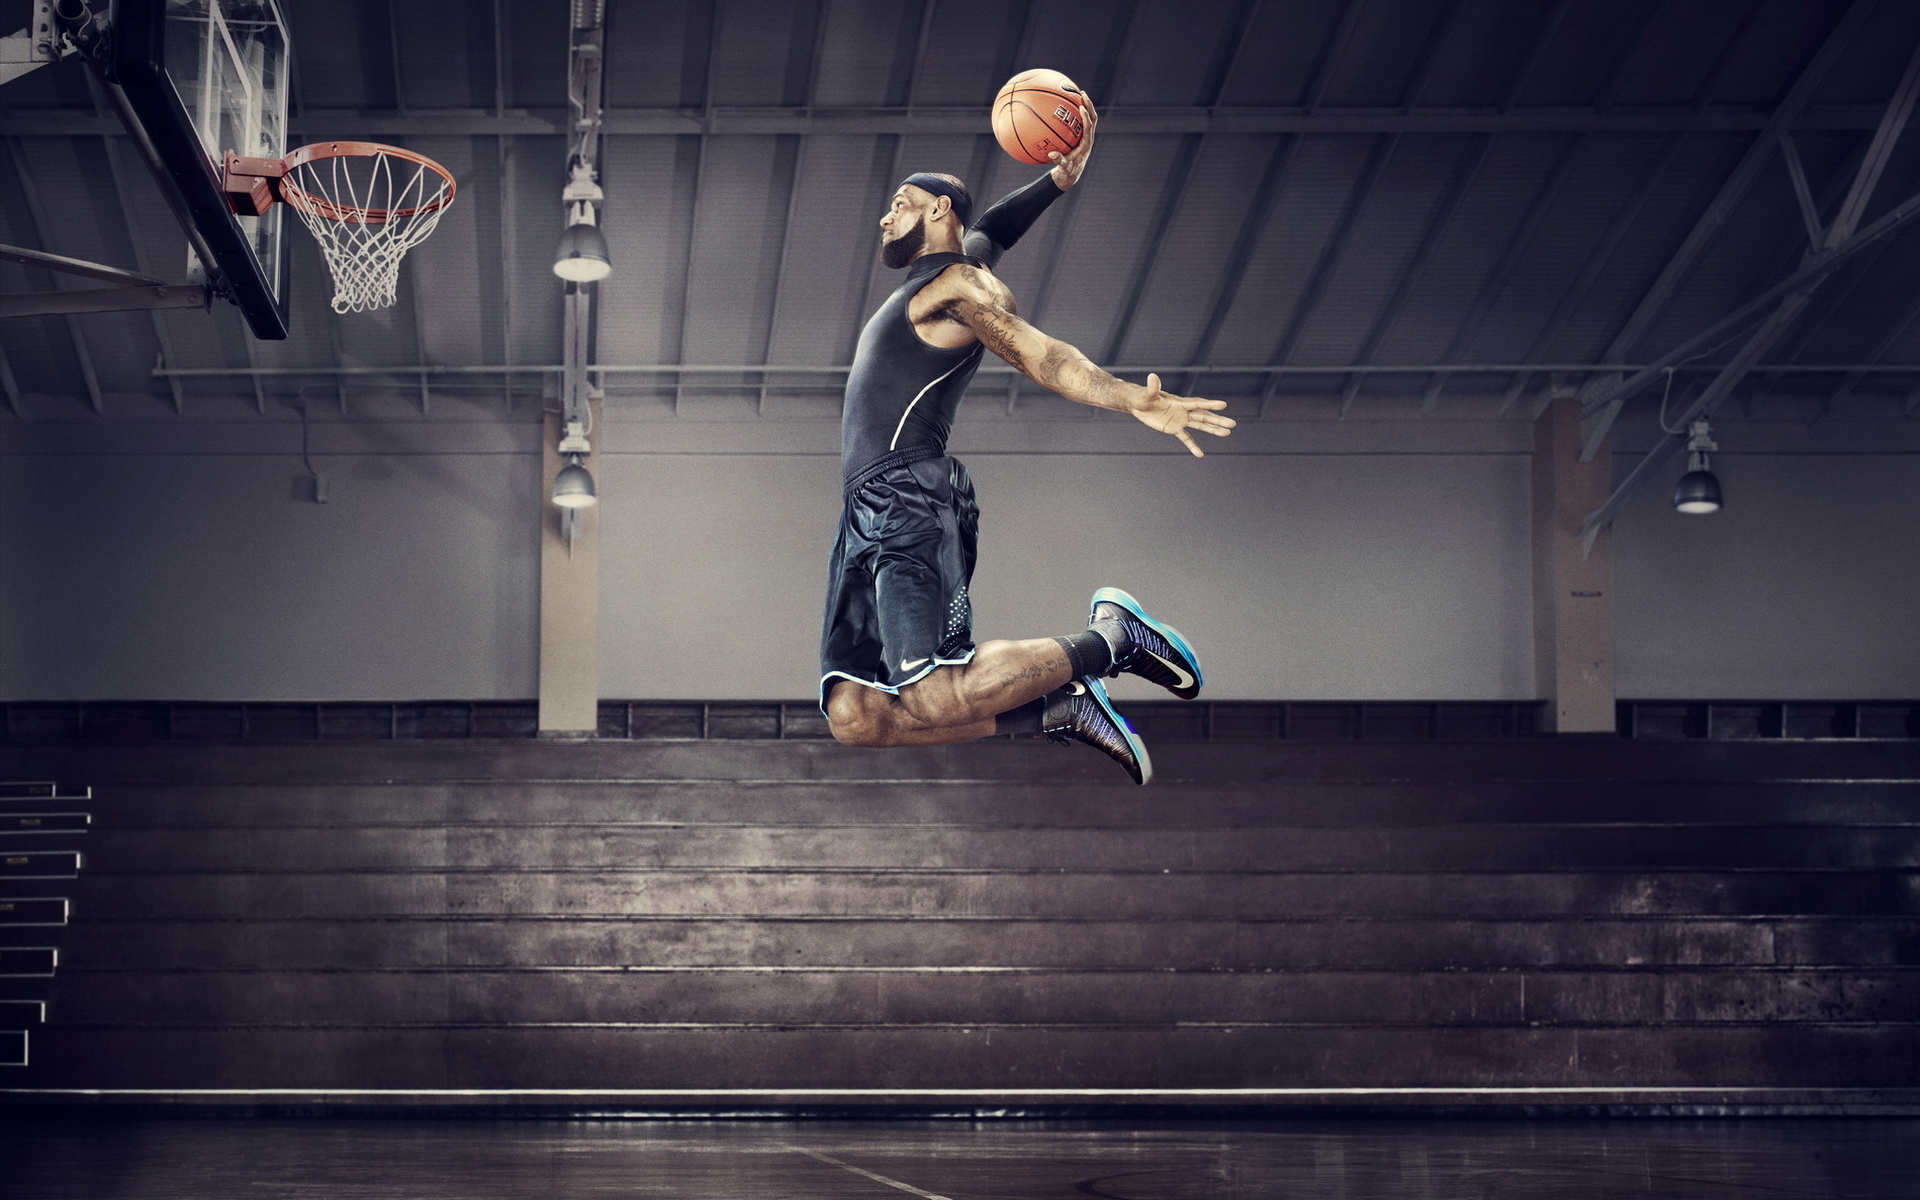 BasketBall Wallpapers Archives - of 6 - Wallpaper